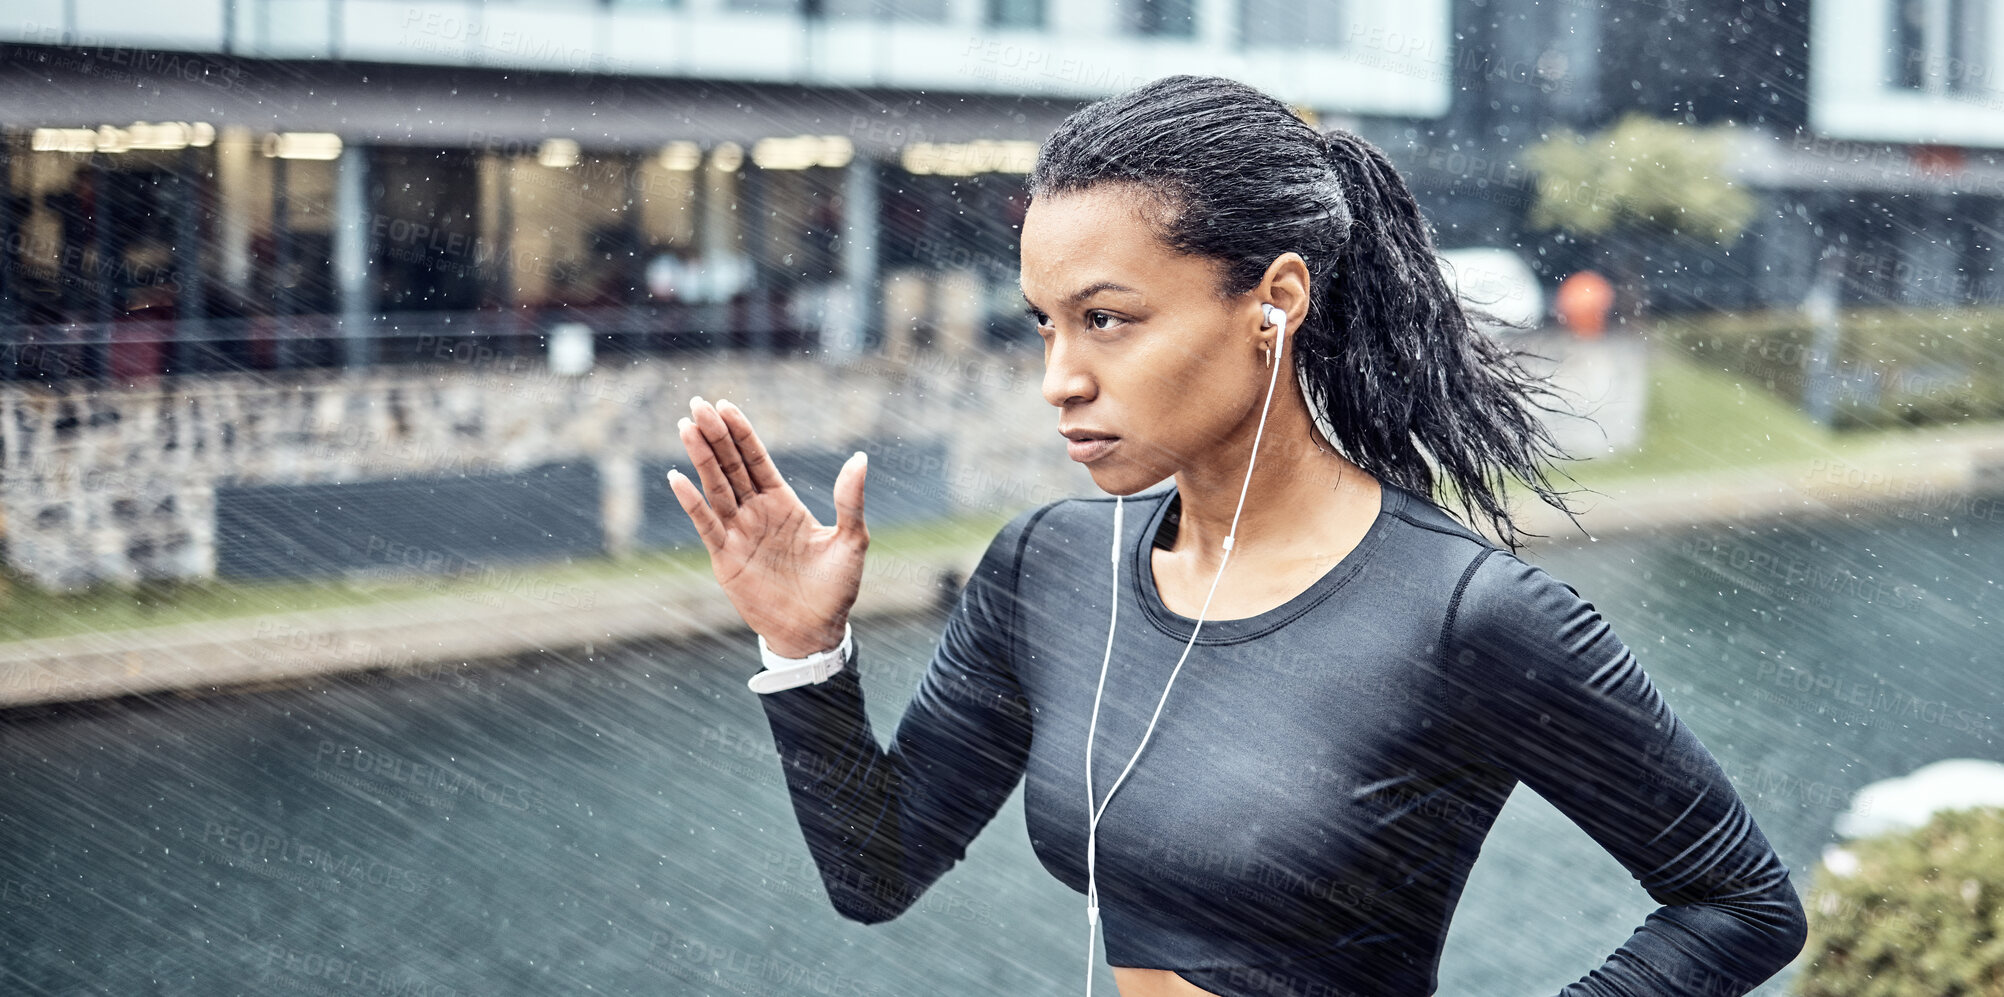 Buy stock photo Black woman, fitness and running with earphones in the rain for sports motivation or determination in the city. African American sporty female runner doing intense cardio workout in the rainy weather